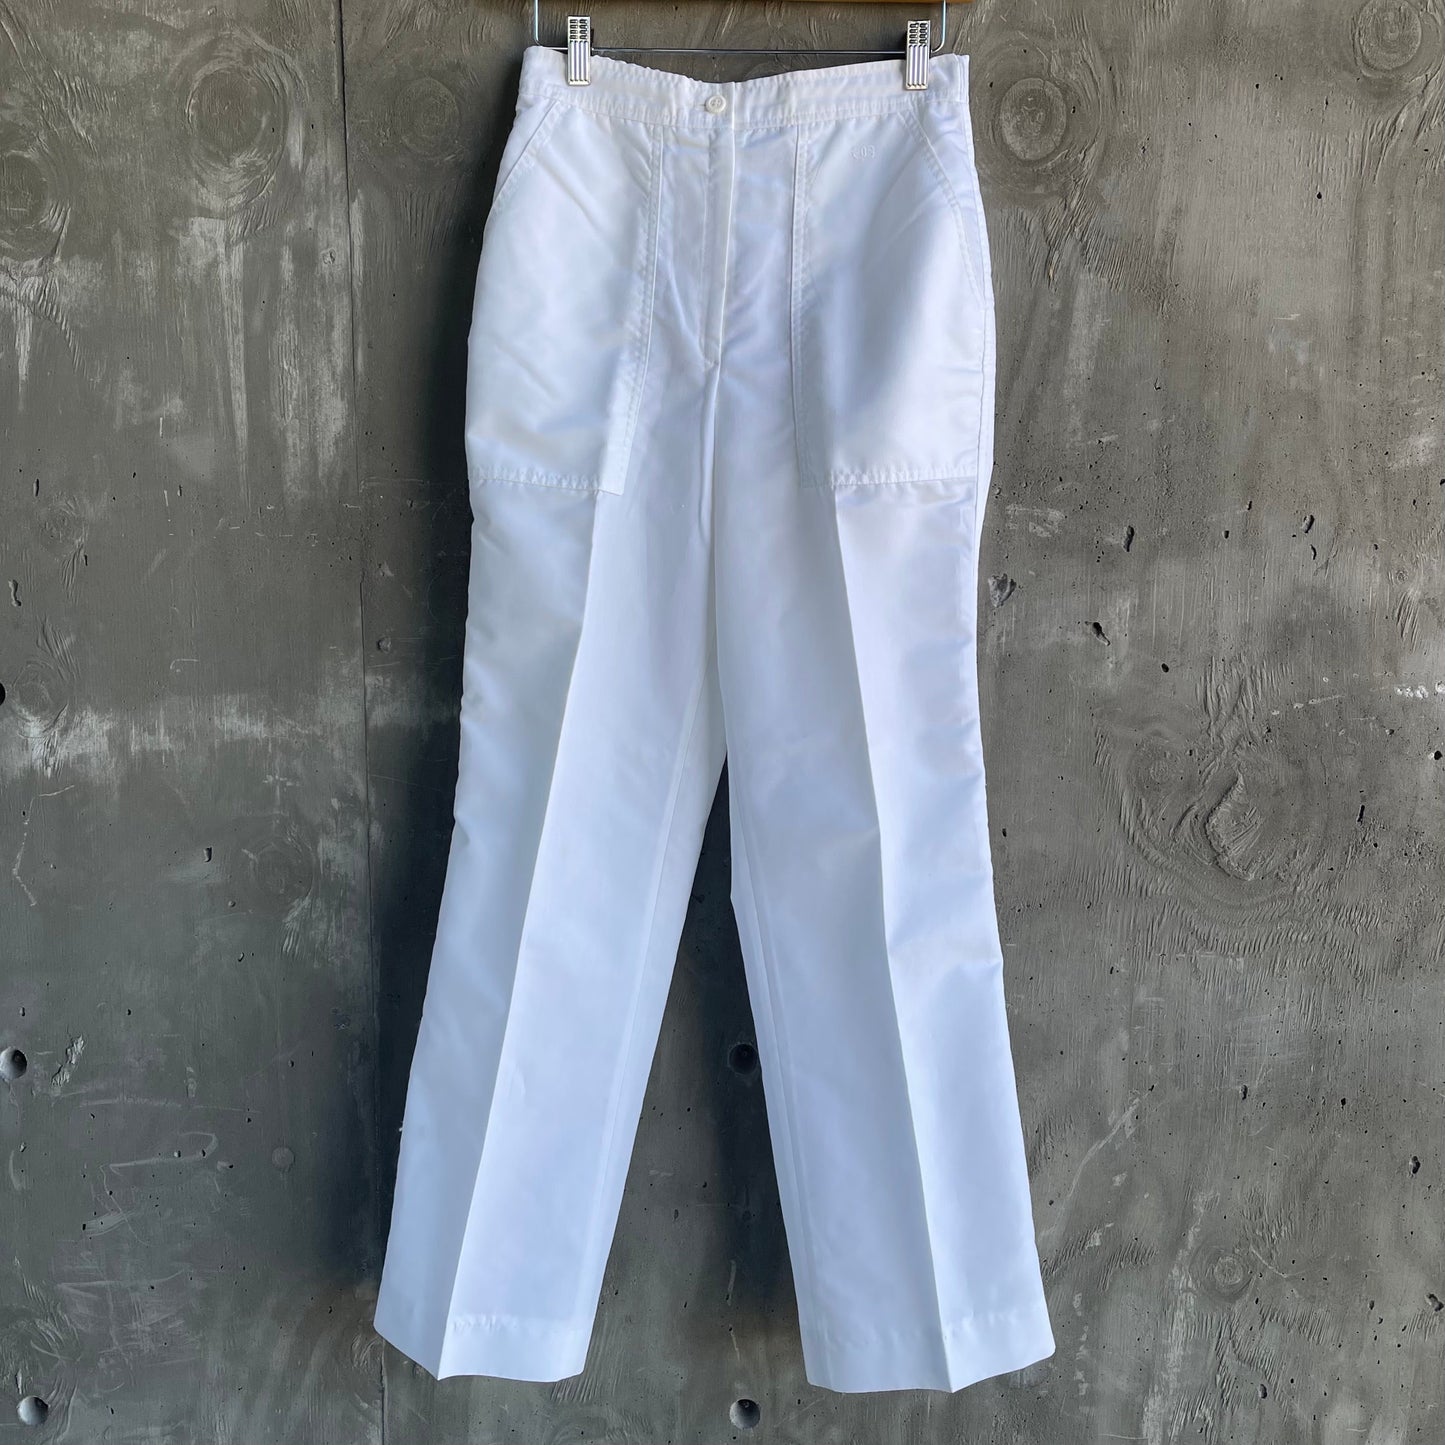 Vintage Givenchy Sport Highwaisyed Pants in White 70’s 80’s